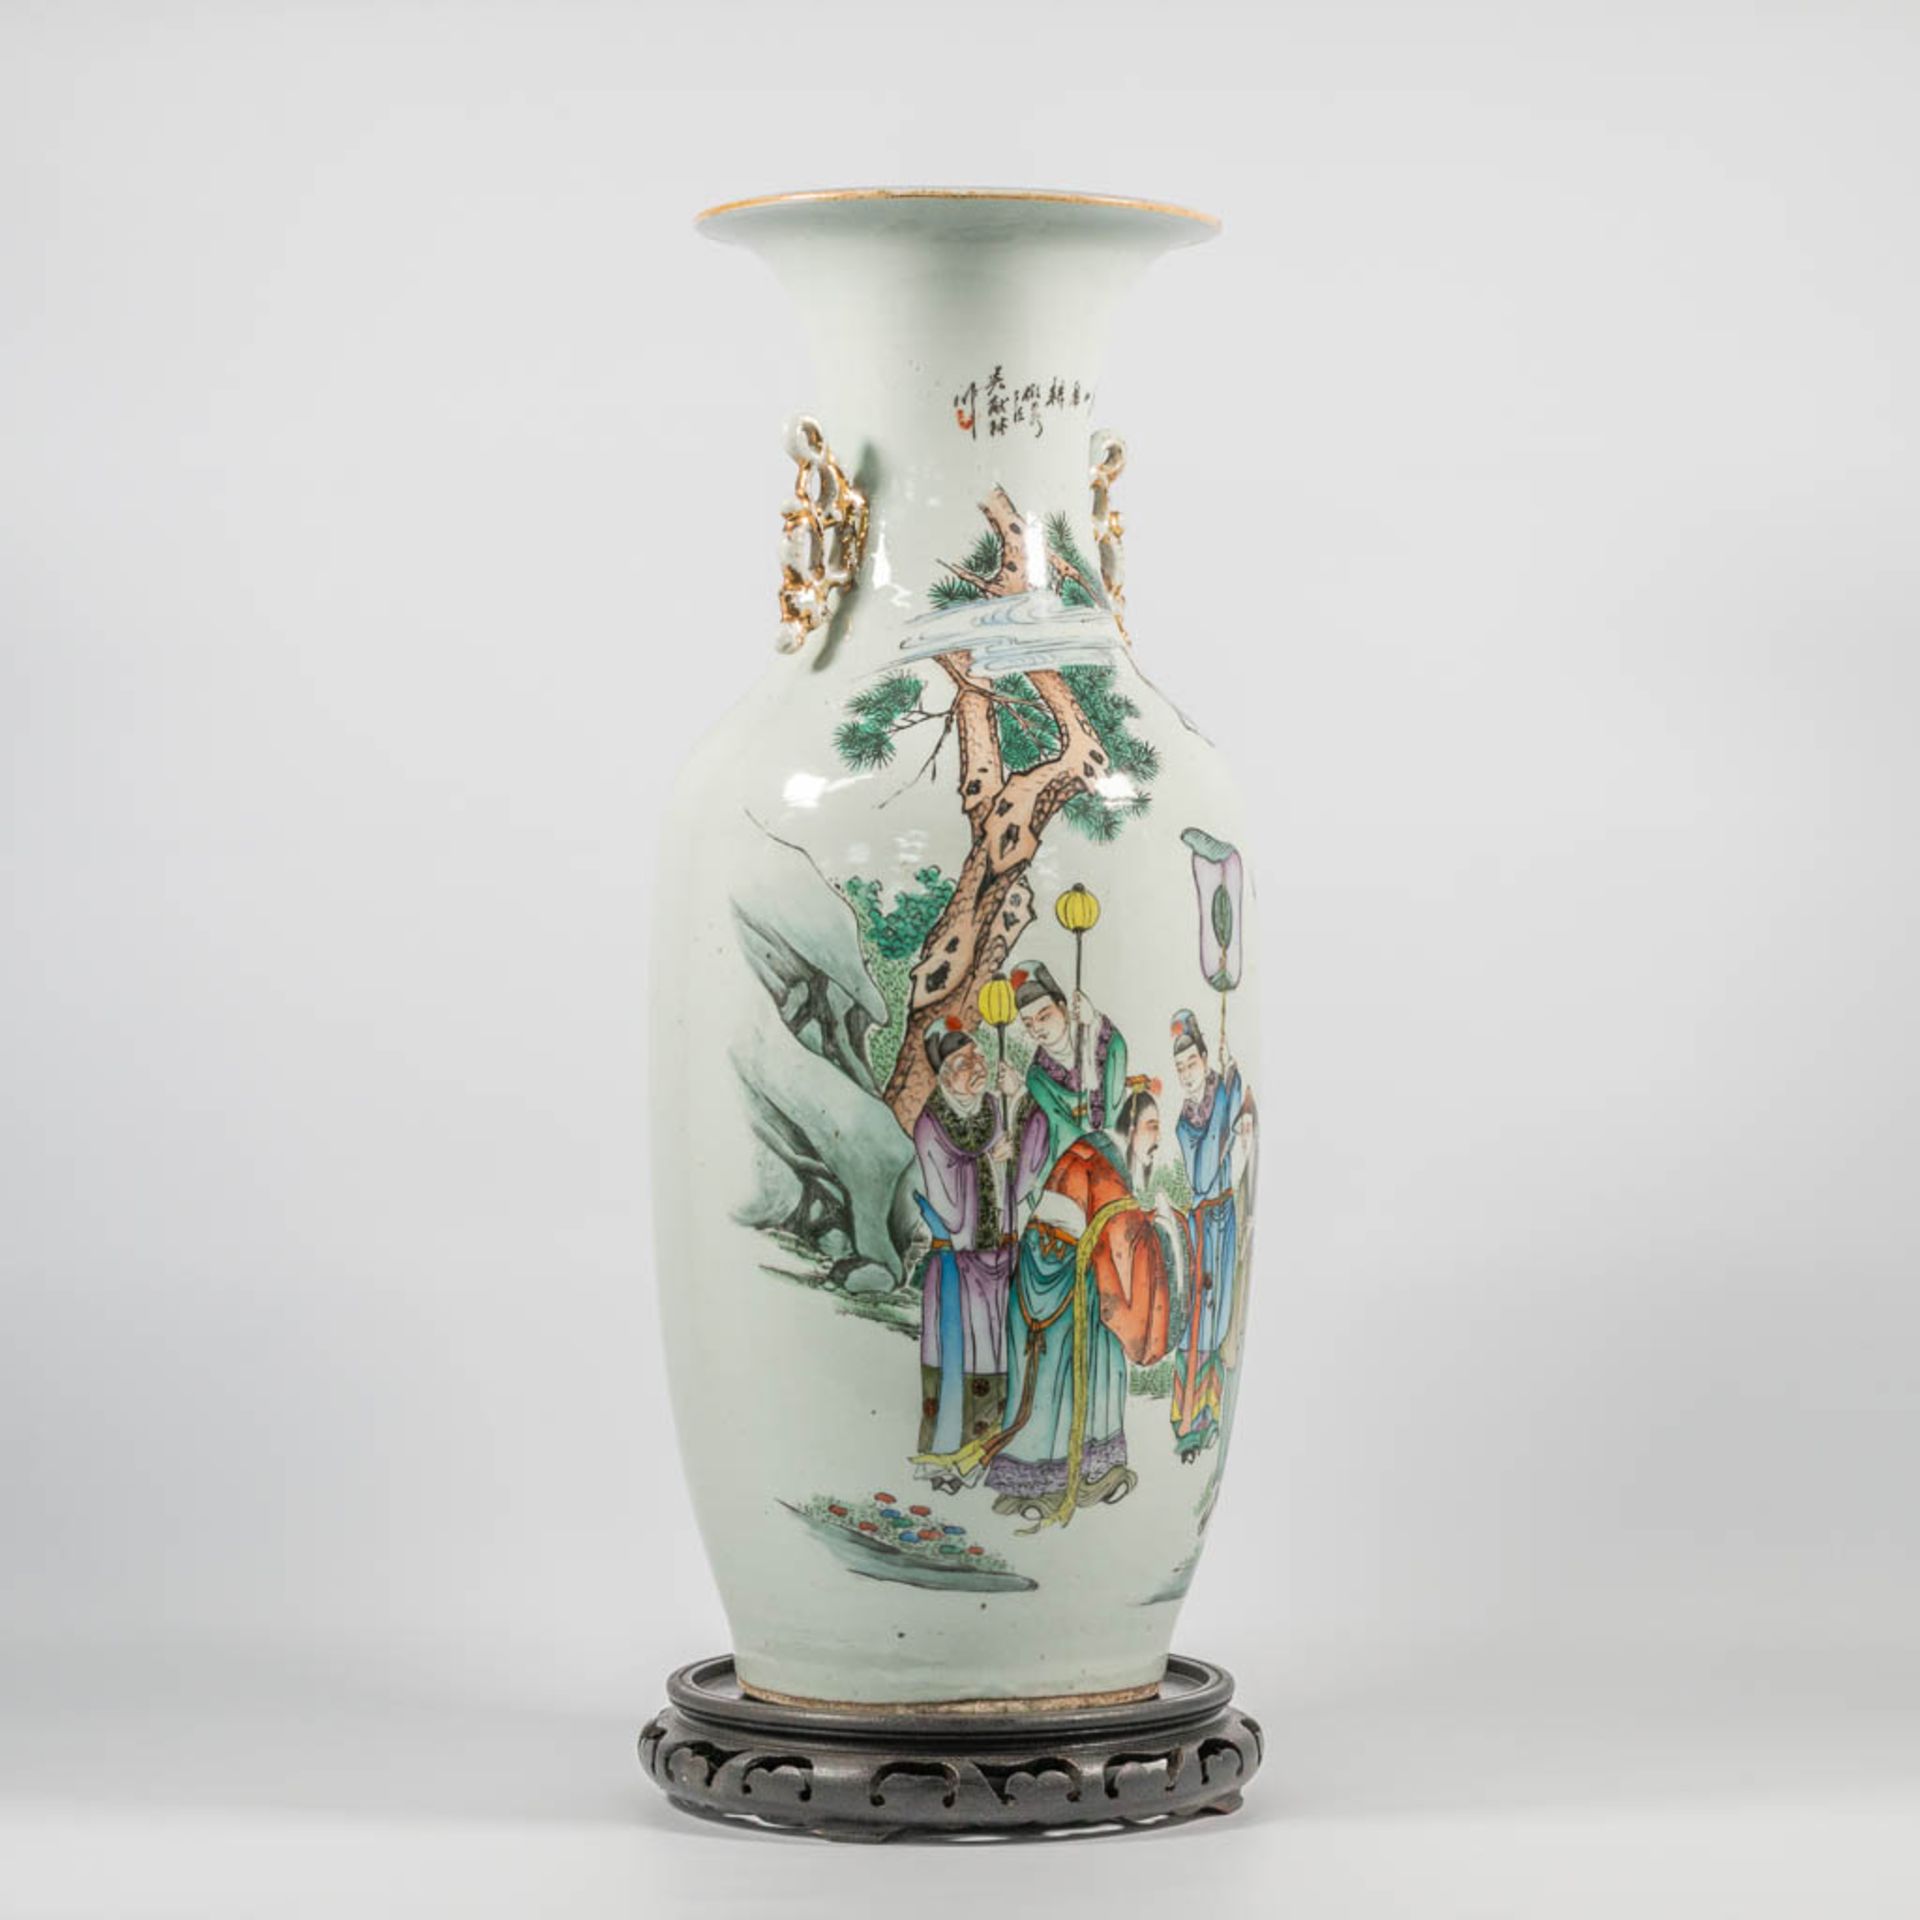 A Chinese vase with wise men, immortals an elephant and pine trees, caligraphic texts. - Image 2 of 13